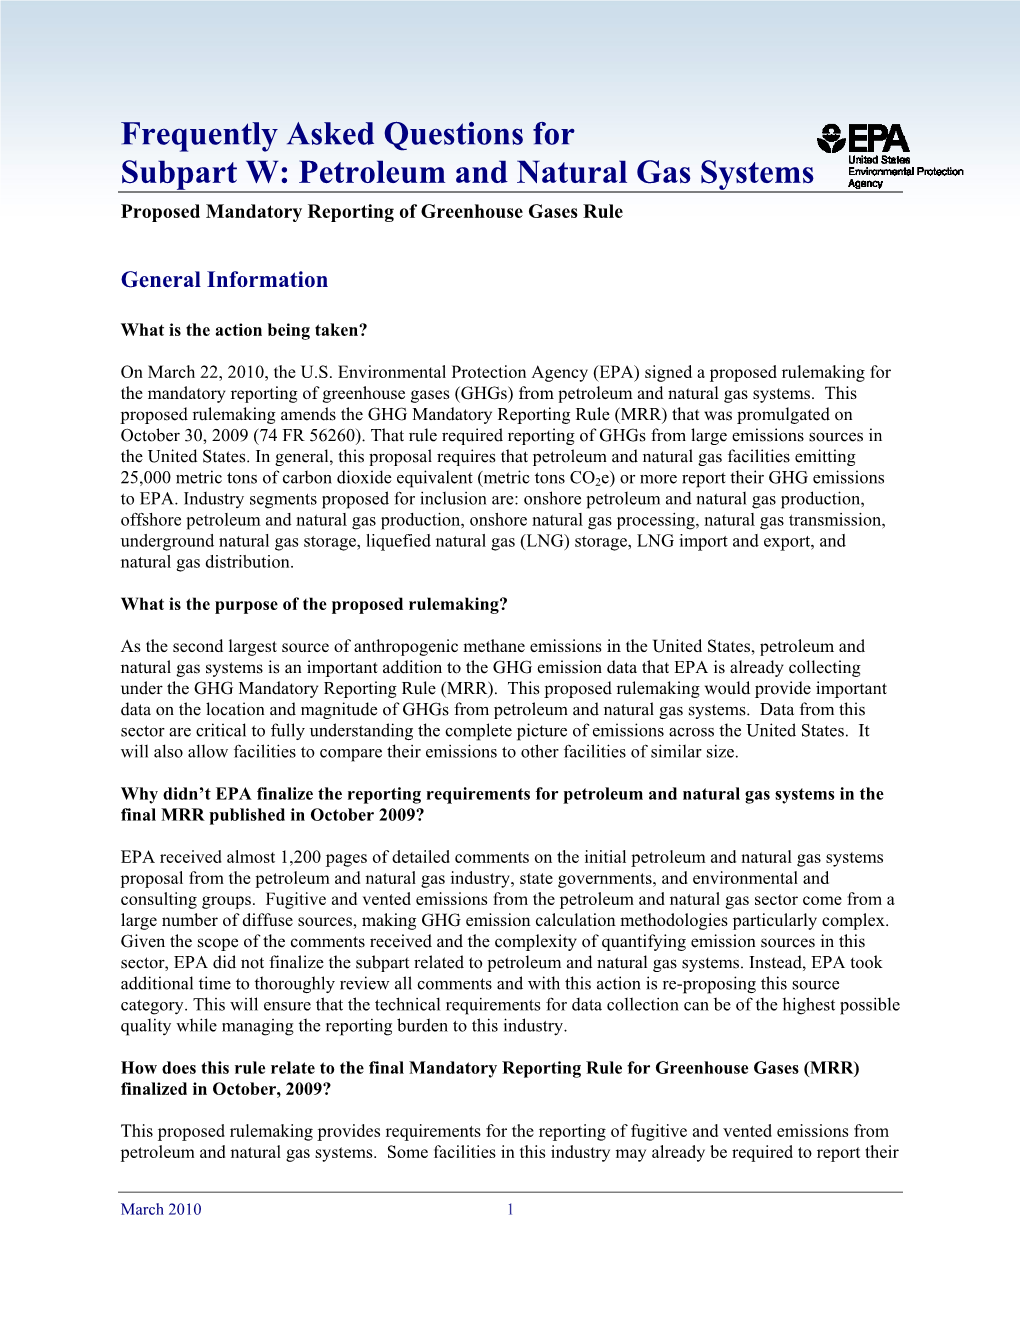 Petroleum and Natural Gas Systems Frequently Asked Questions